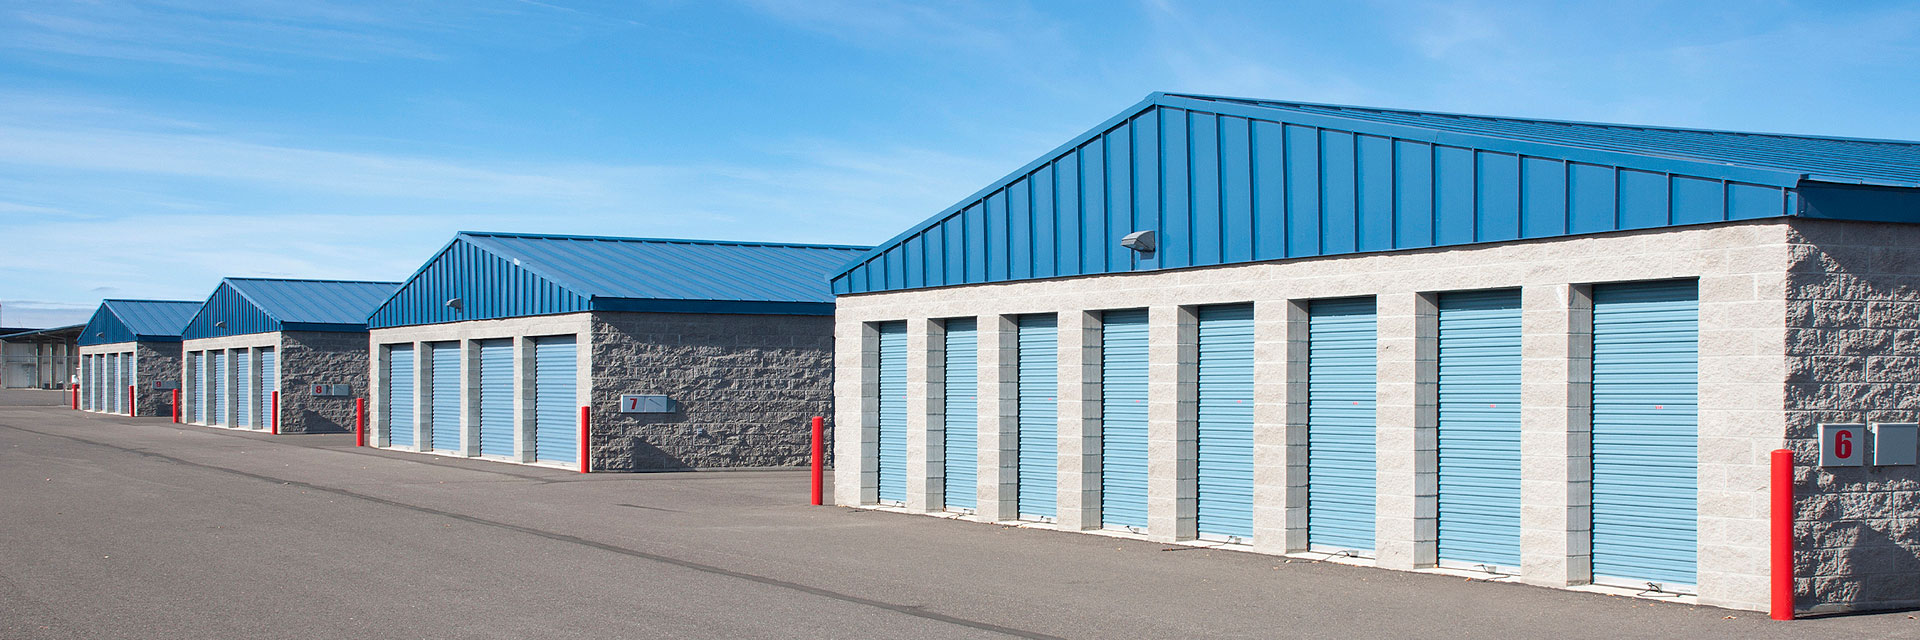 Only national network of brokers who specialize in self-storage properties.